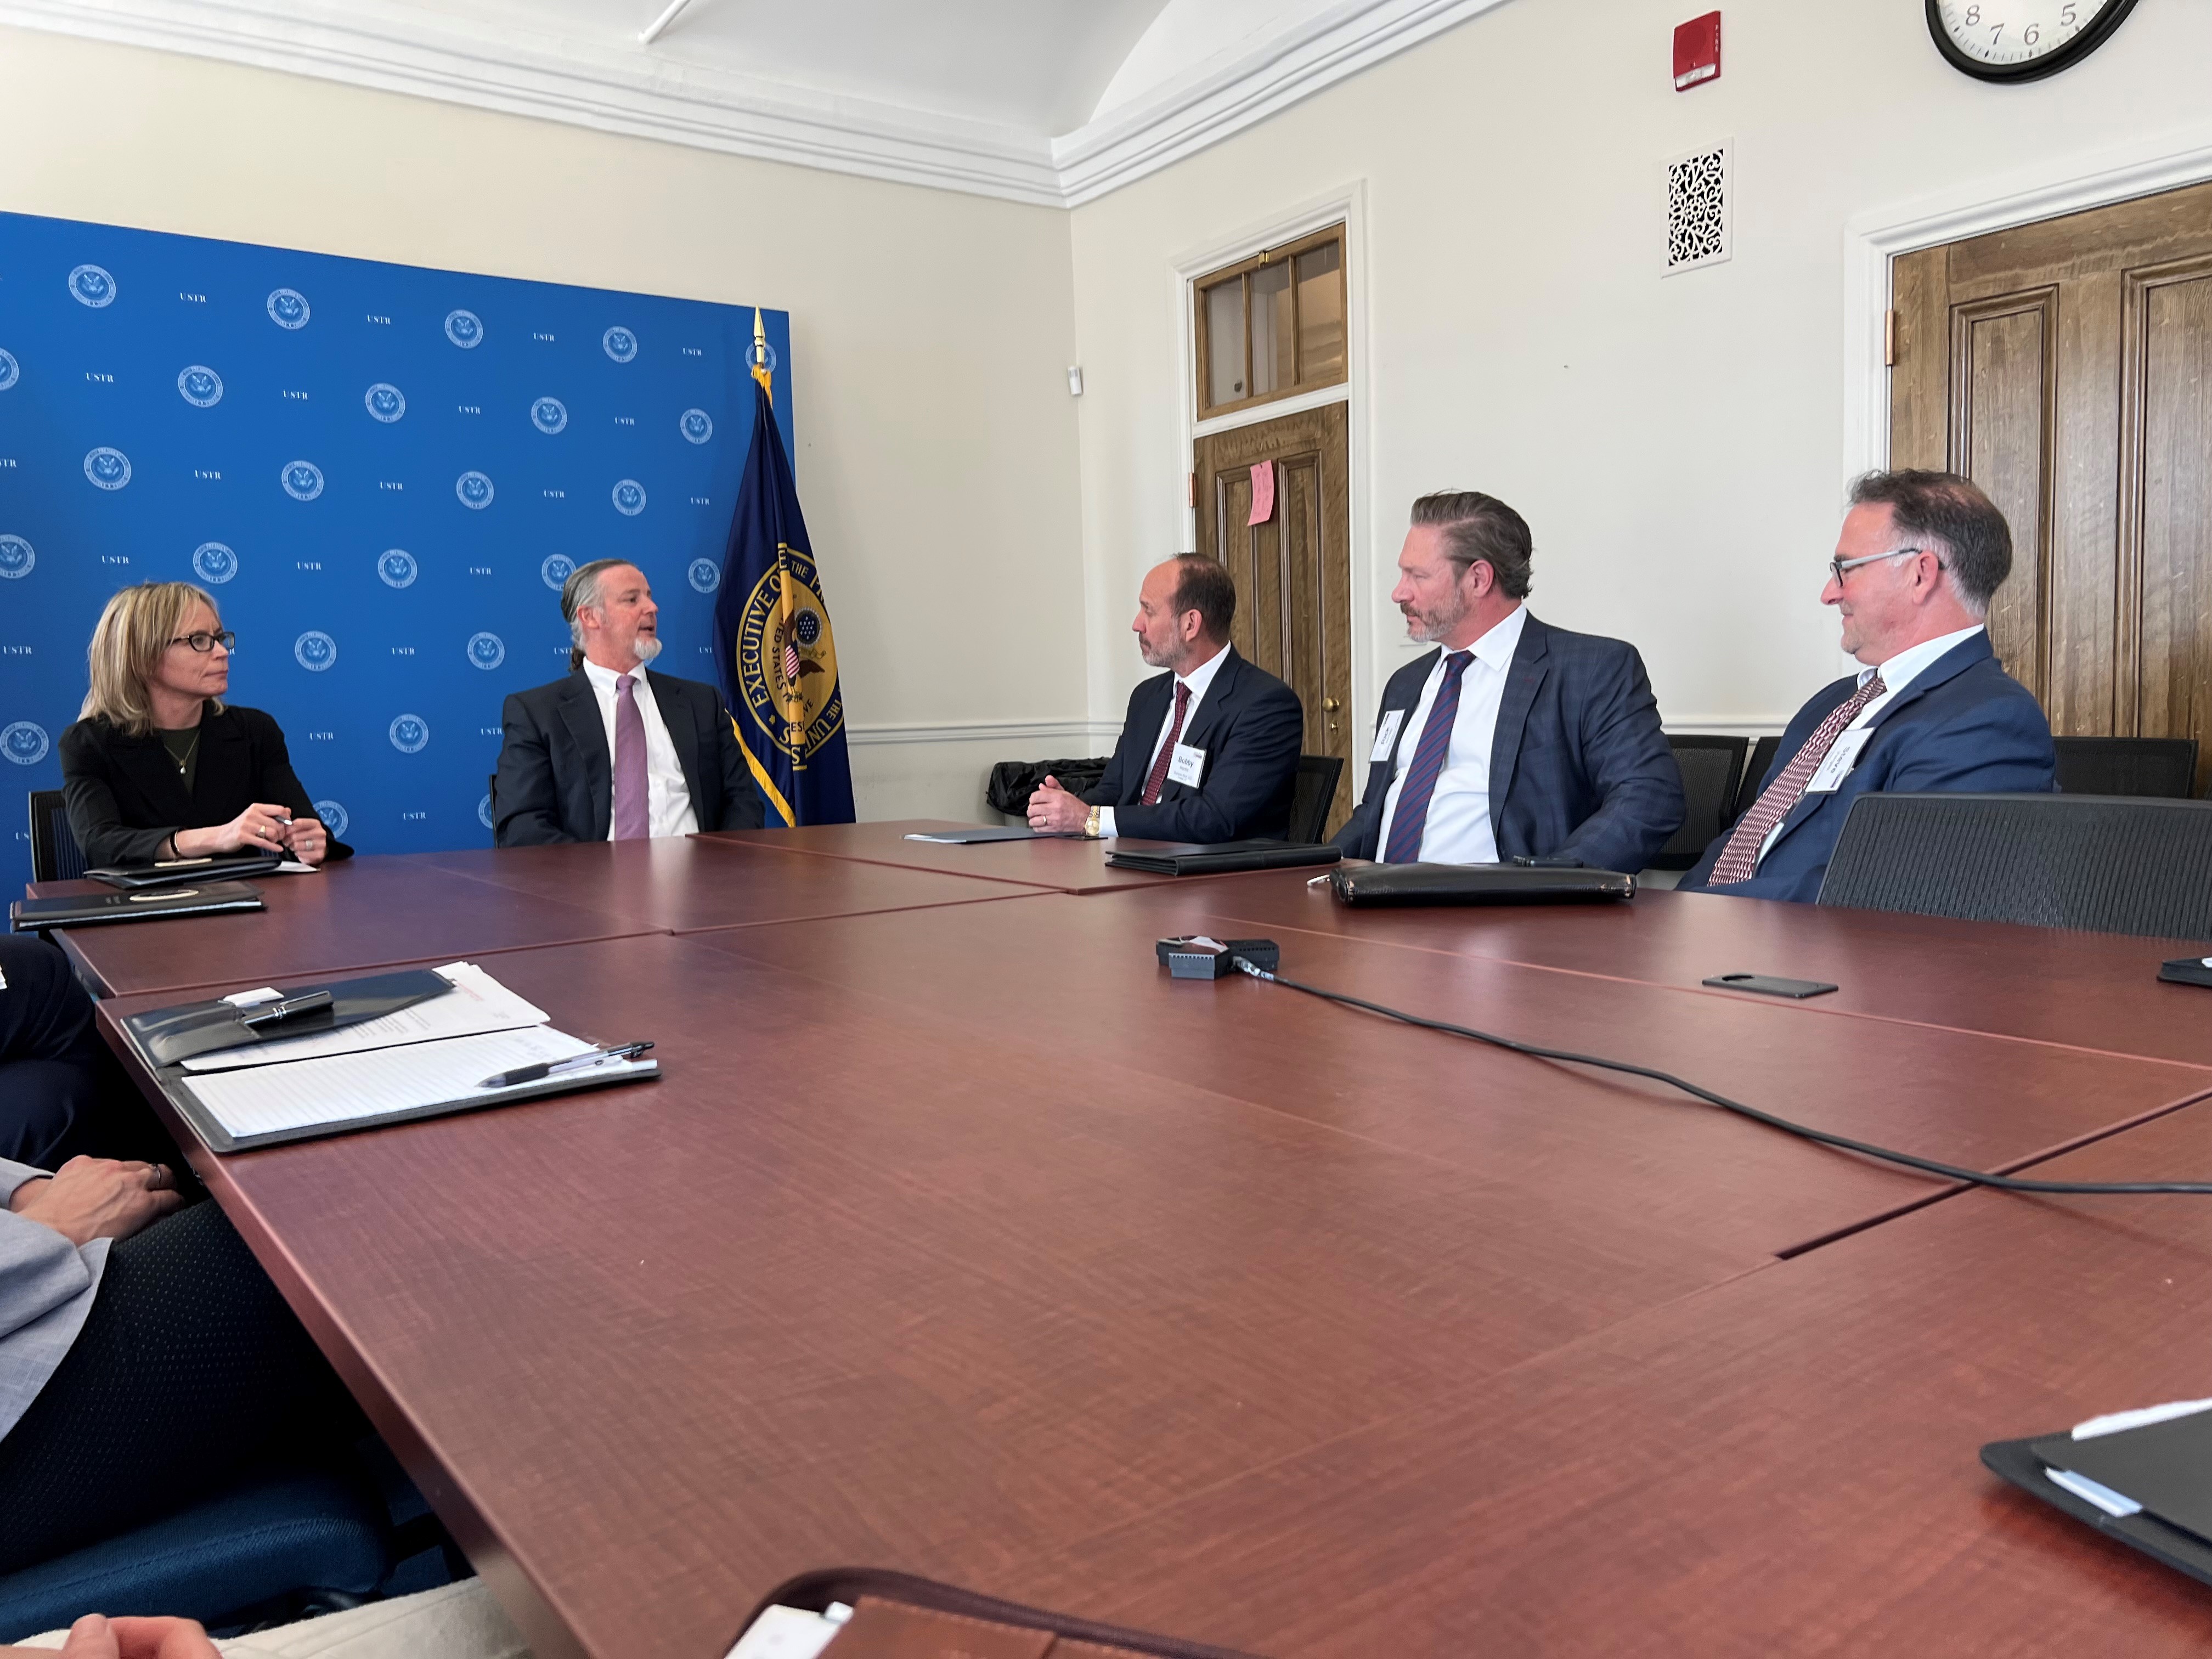 Mtg with USTR Ag Negotiator Doug McKalip, group of people seated around conference table